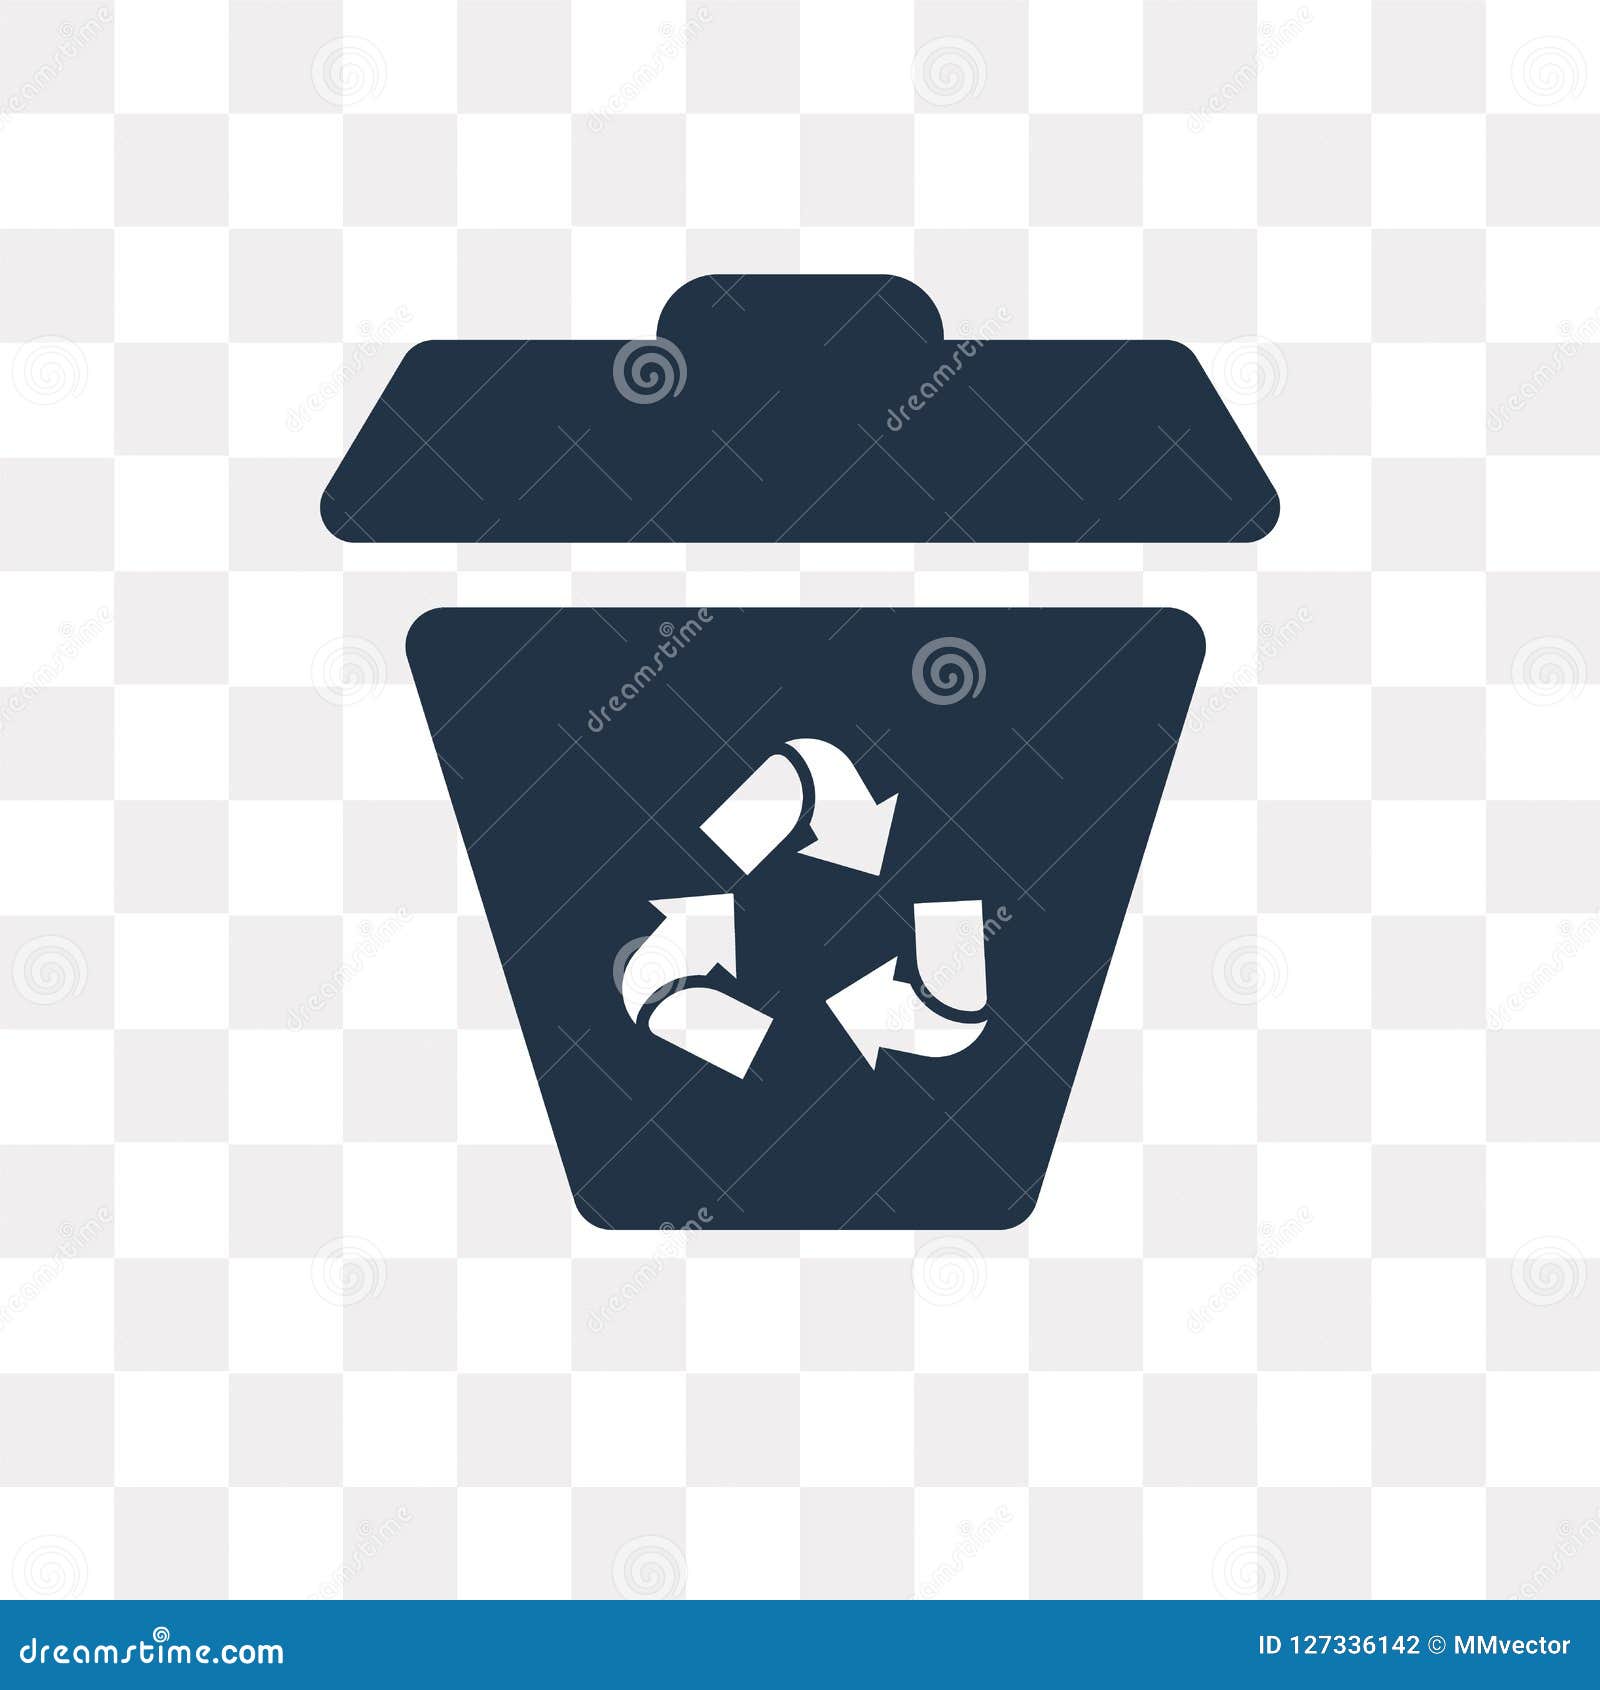 Bin Vector Icon Isolated On Transparent Background, Bin Transpa Stock ...